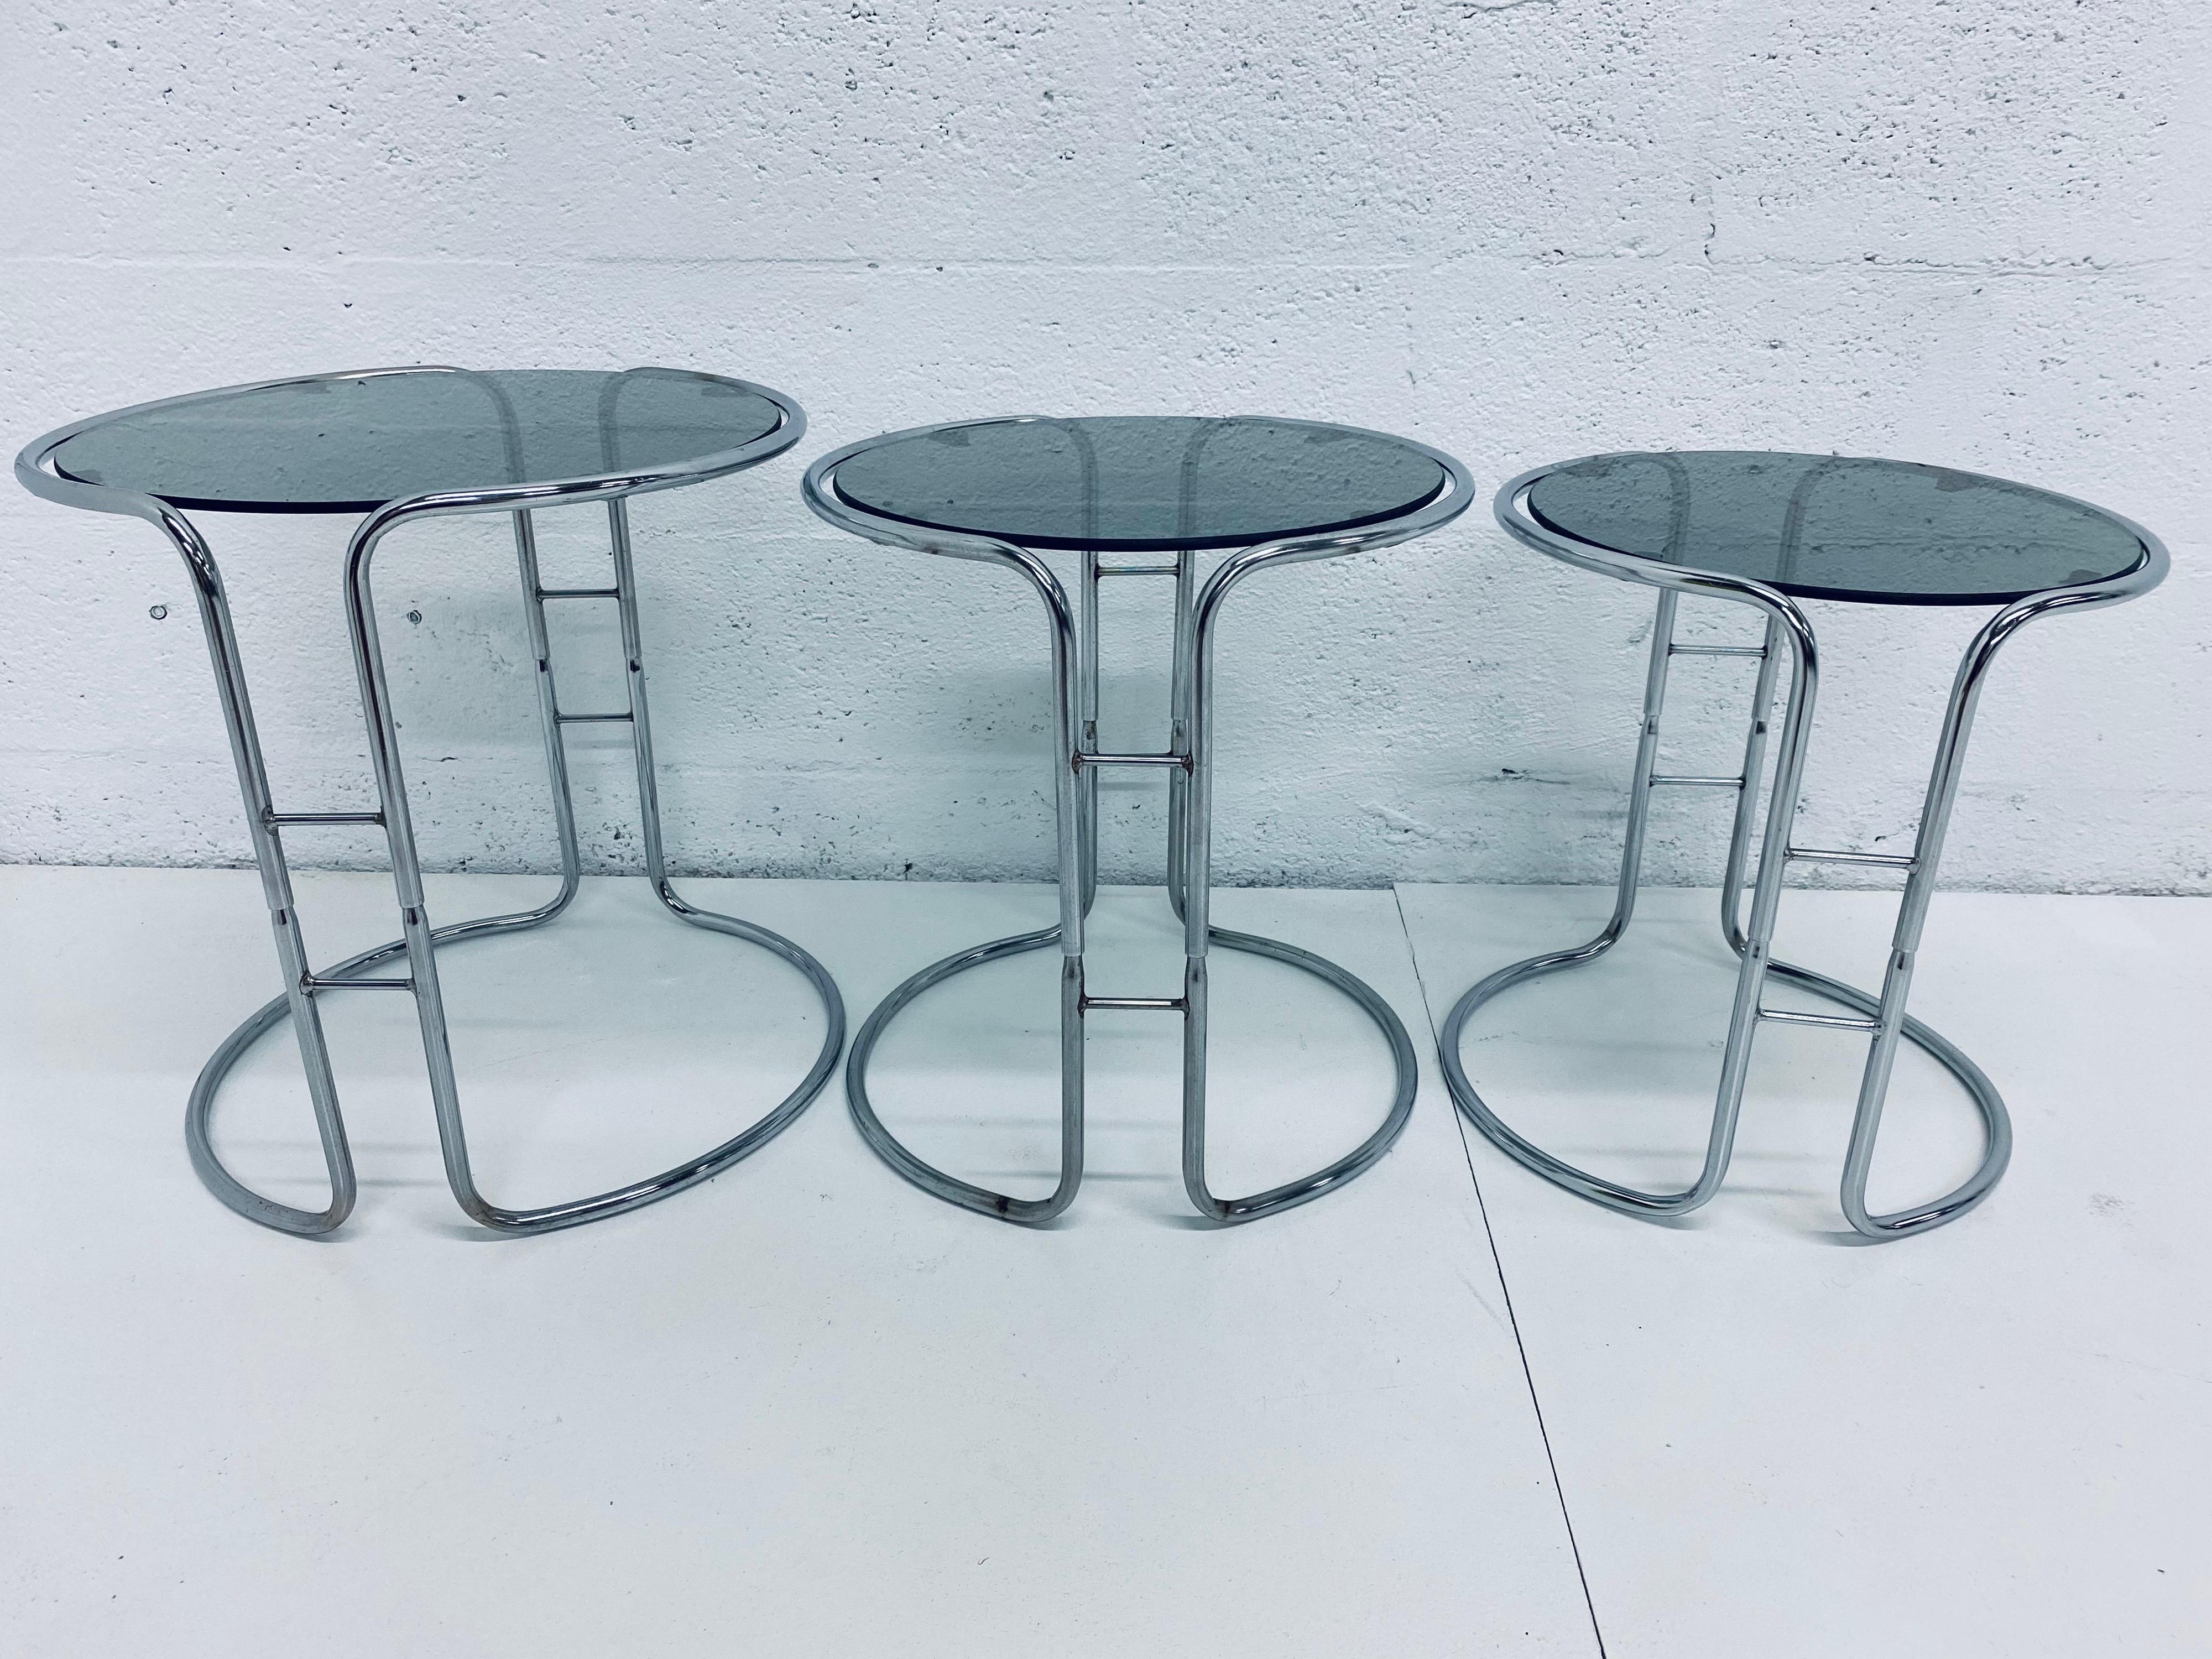 Set of three tubular chrome and smoked glass nesting tables from the 1970s. Tables stack one over the other.

Dimensions:
Large - W 17.25”, D 17.25”, H 17.25”
Medium - W 15.5”, D 15.5”, H 16.25”
Small - W 14.25”, D 14.25”, H 15.5”.